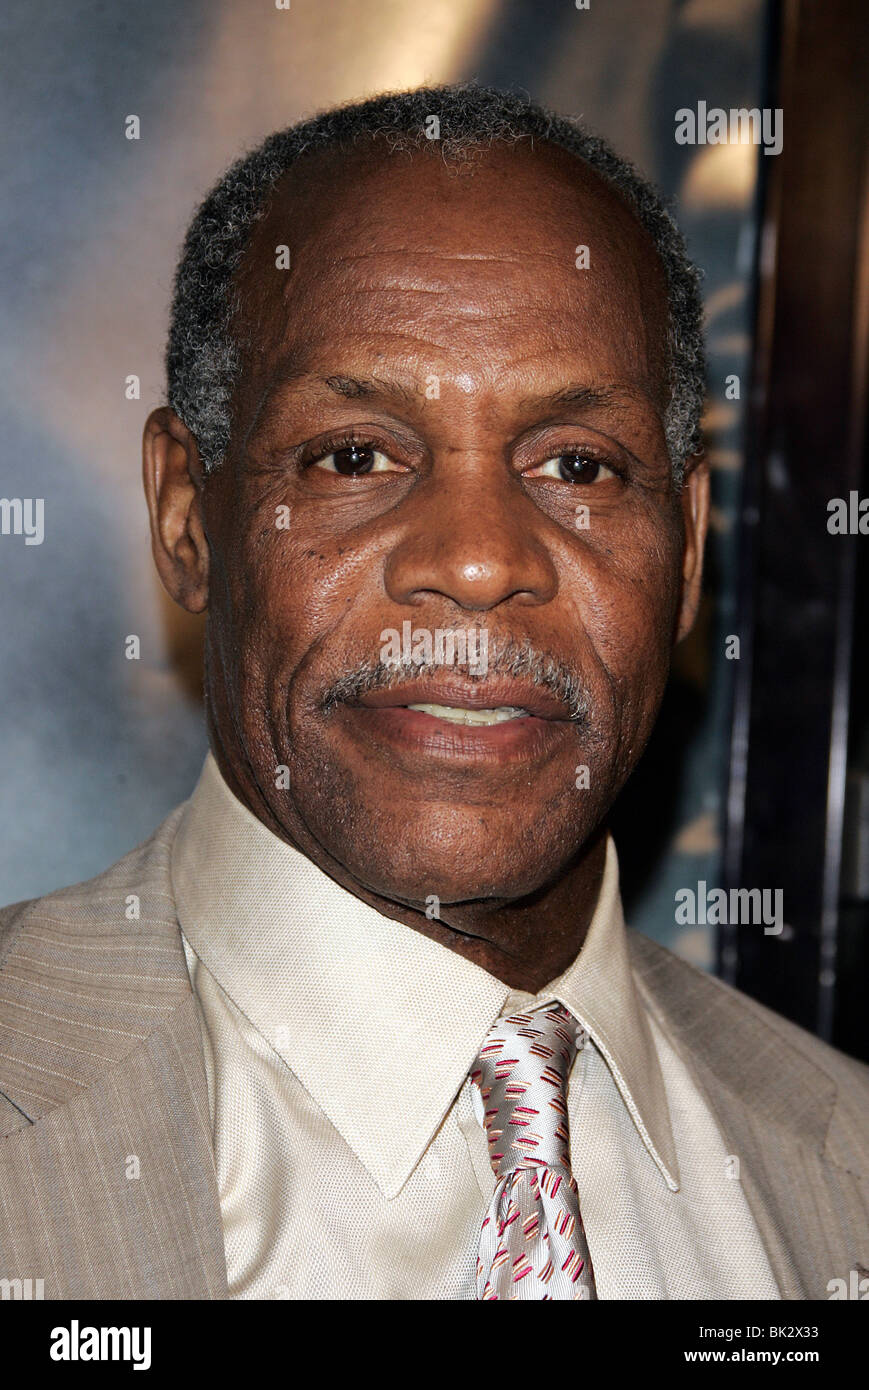 DANNY GLOVER SHOOTER PREMIERE LOS ANGELES WESTWOOD LOS ANGELES USA 08 Mars 2007 Banque D'Images